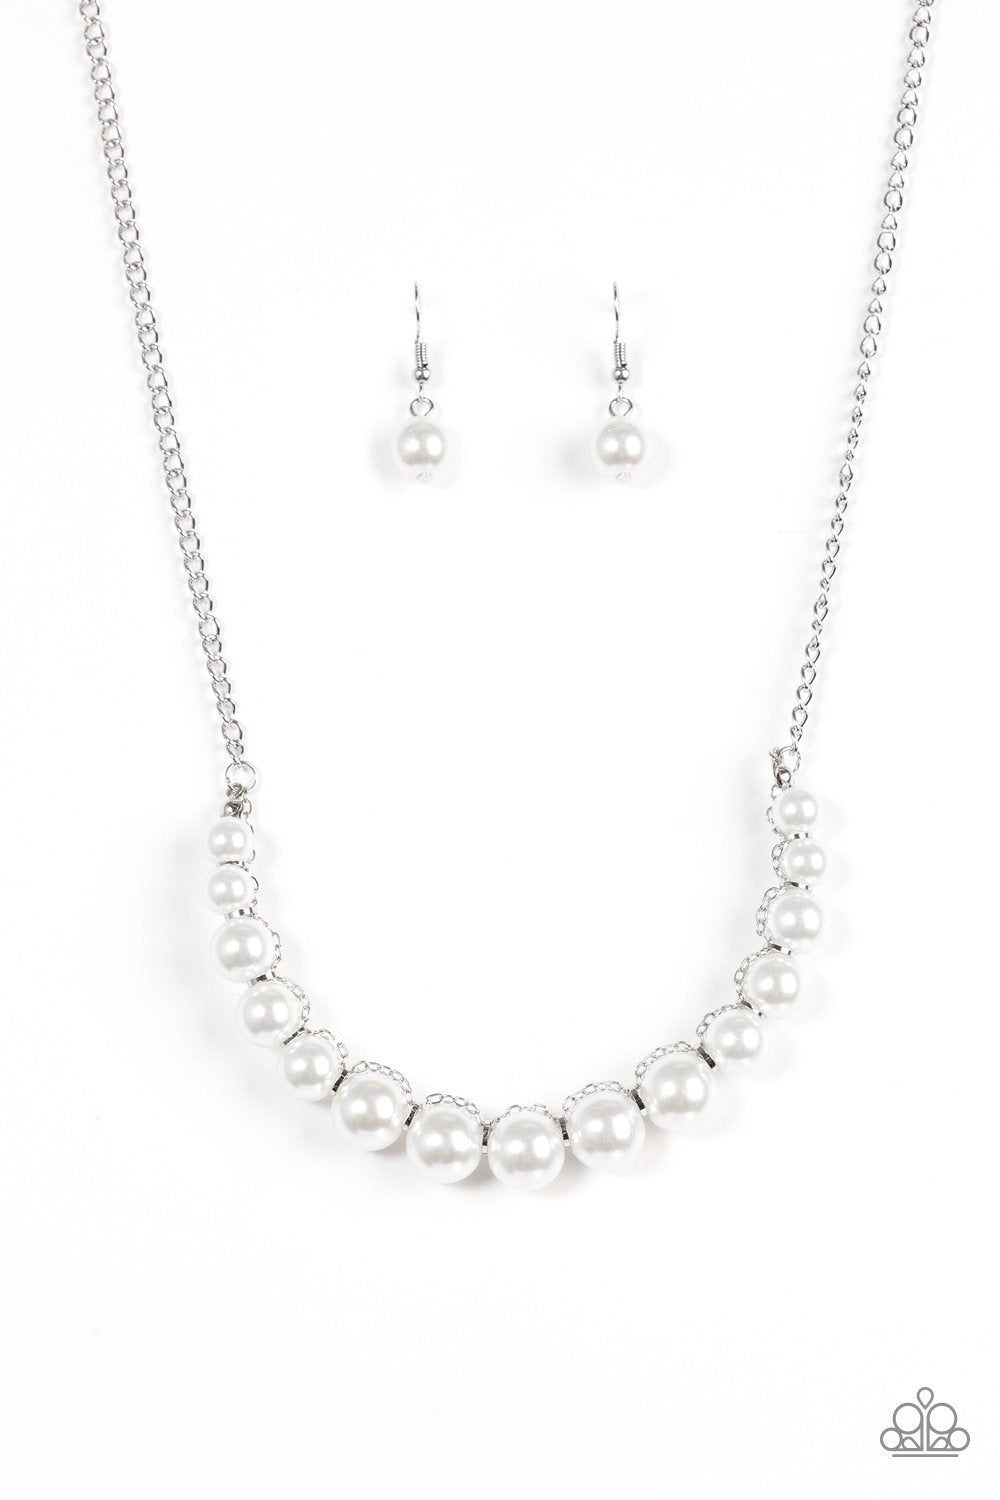 Paparazzi Necklace ~ The FASHION Show Must Go On! - White